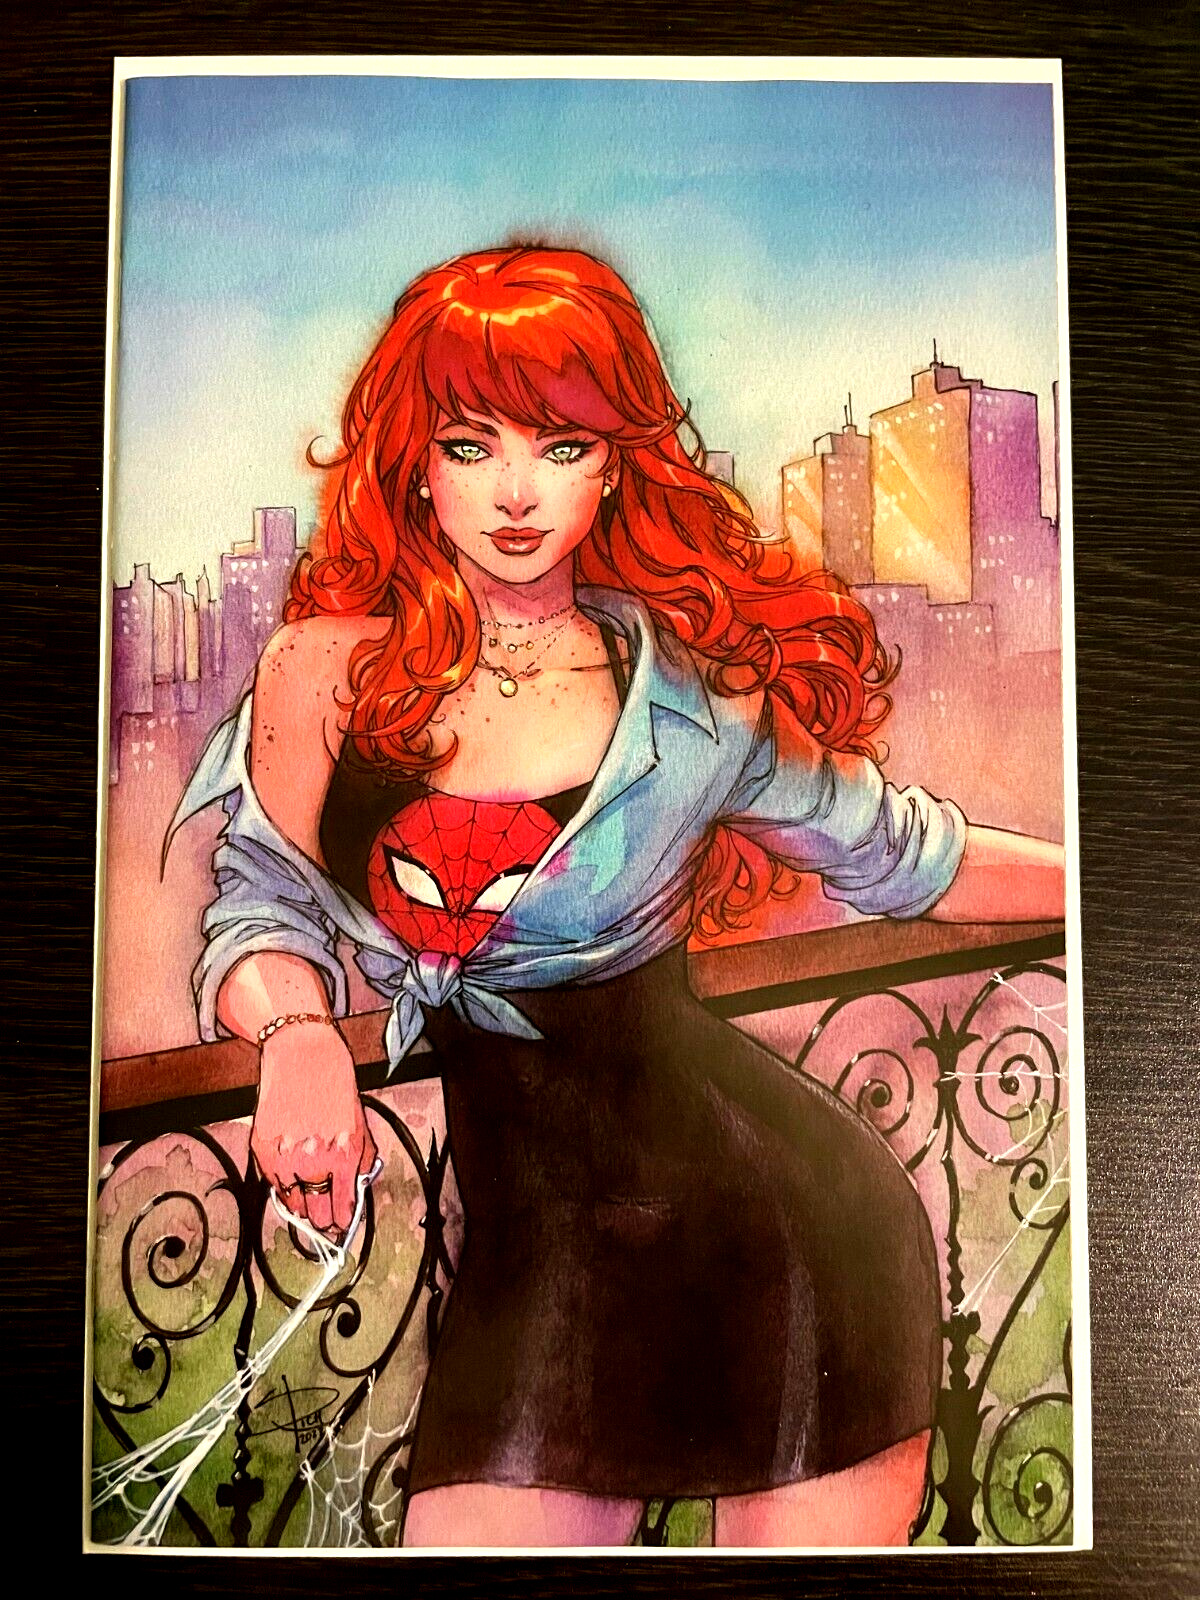 SPIDER-MAN #1 MARY JANE NEW YORK CC EXCLUSIVE VIRGIN COVER LTD 250 NM+